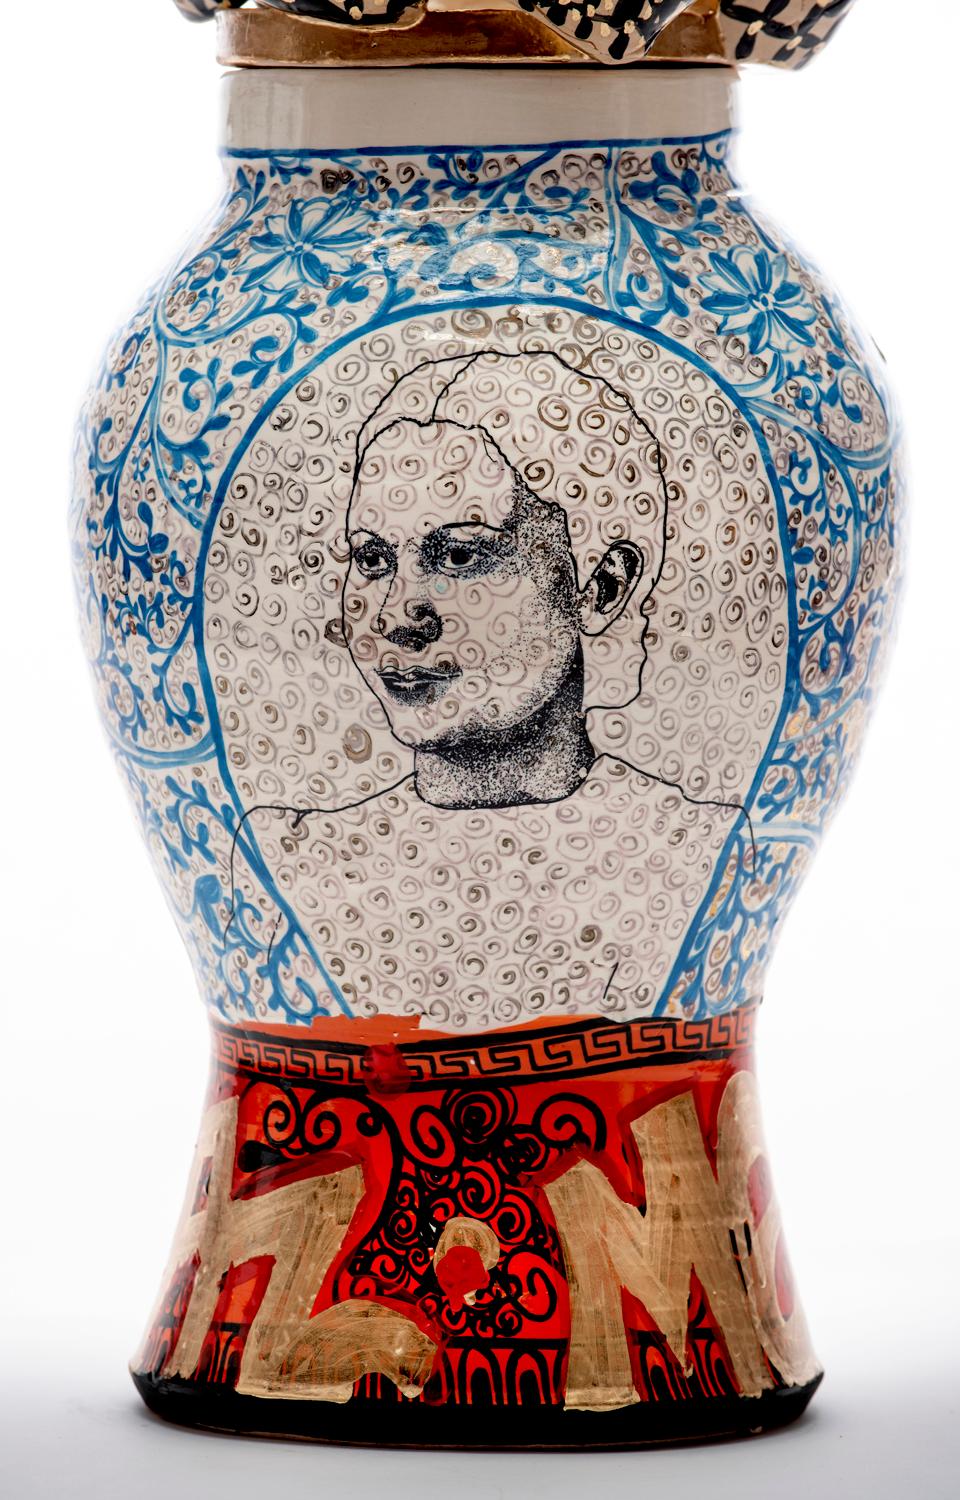 Porcelain, china paint, and luster vessel depicting Puerto Rican poet Julia de Burgos and hip-hop artist Ice Cube. The top of the vessel features a circle of casts of the artist's hand. Created by American artist Roberto Lugo, who deftly combines